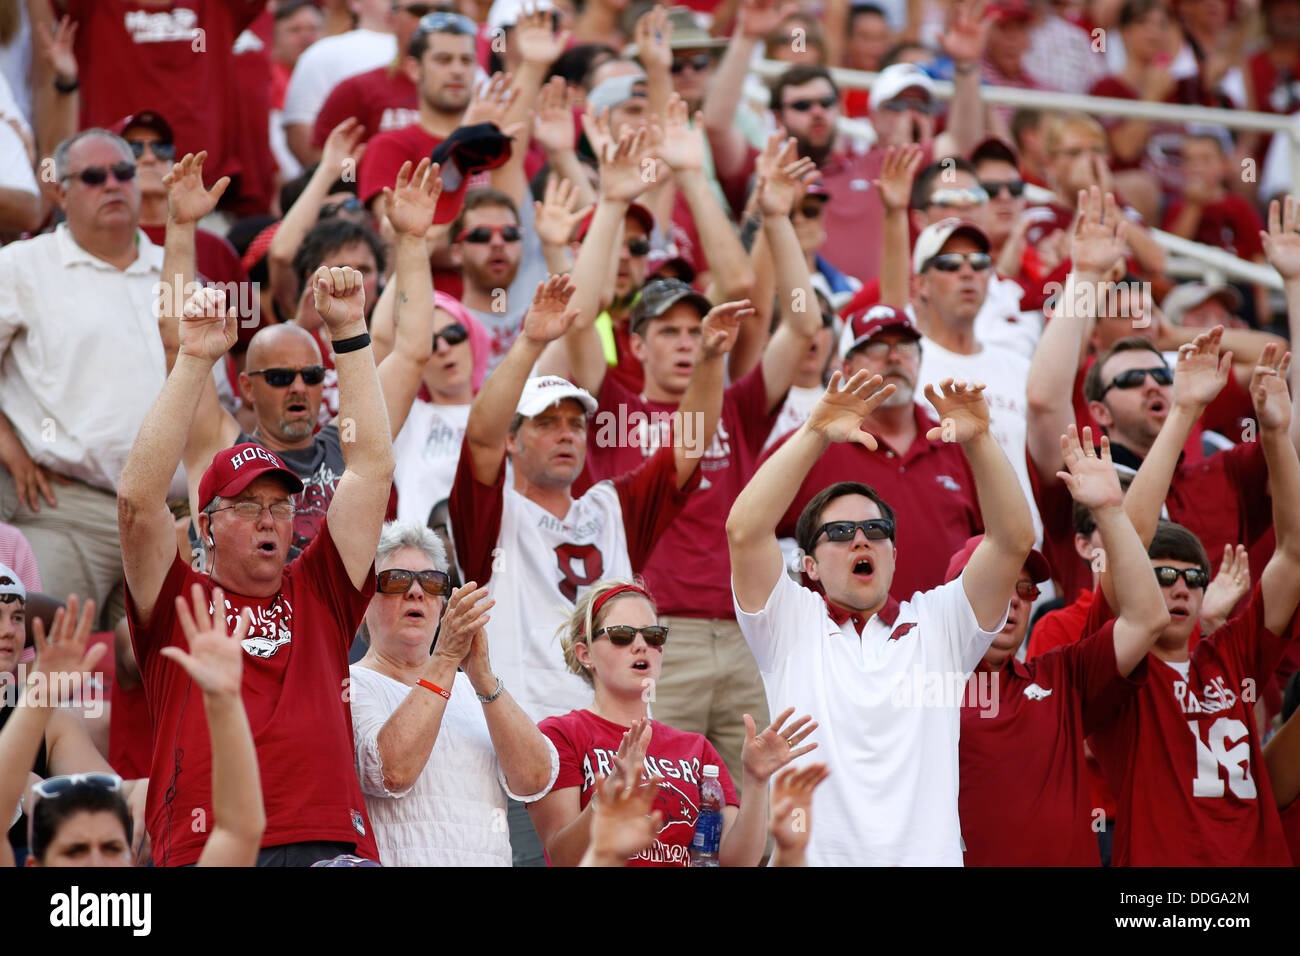 Arkansas fans perform a 'Hog Call' during a Razorback football game in Fayetteville, Ark. Stock Photo